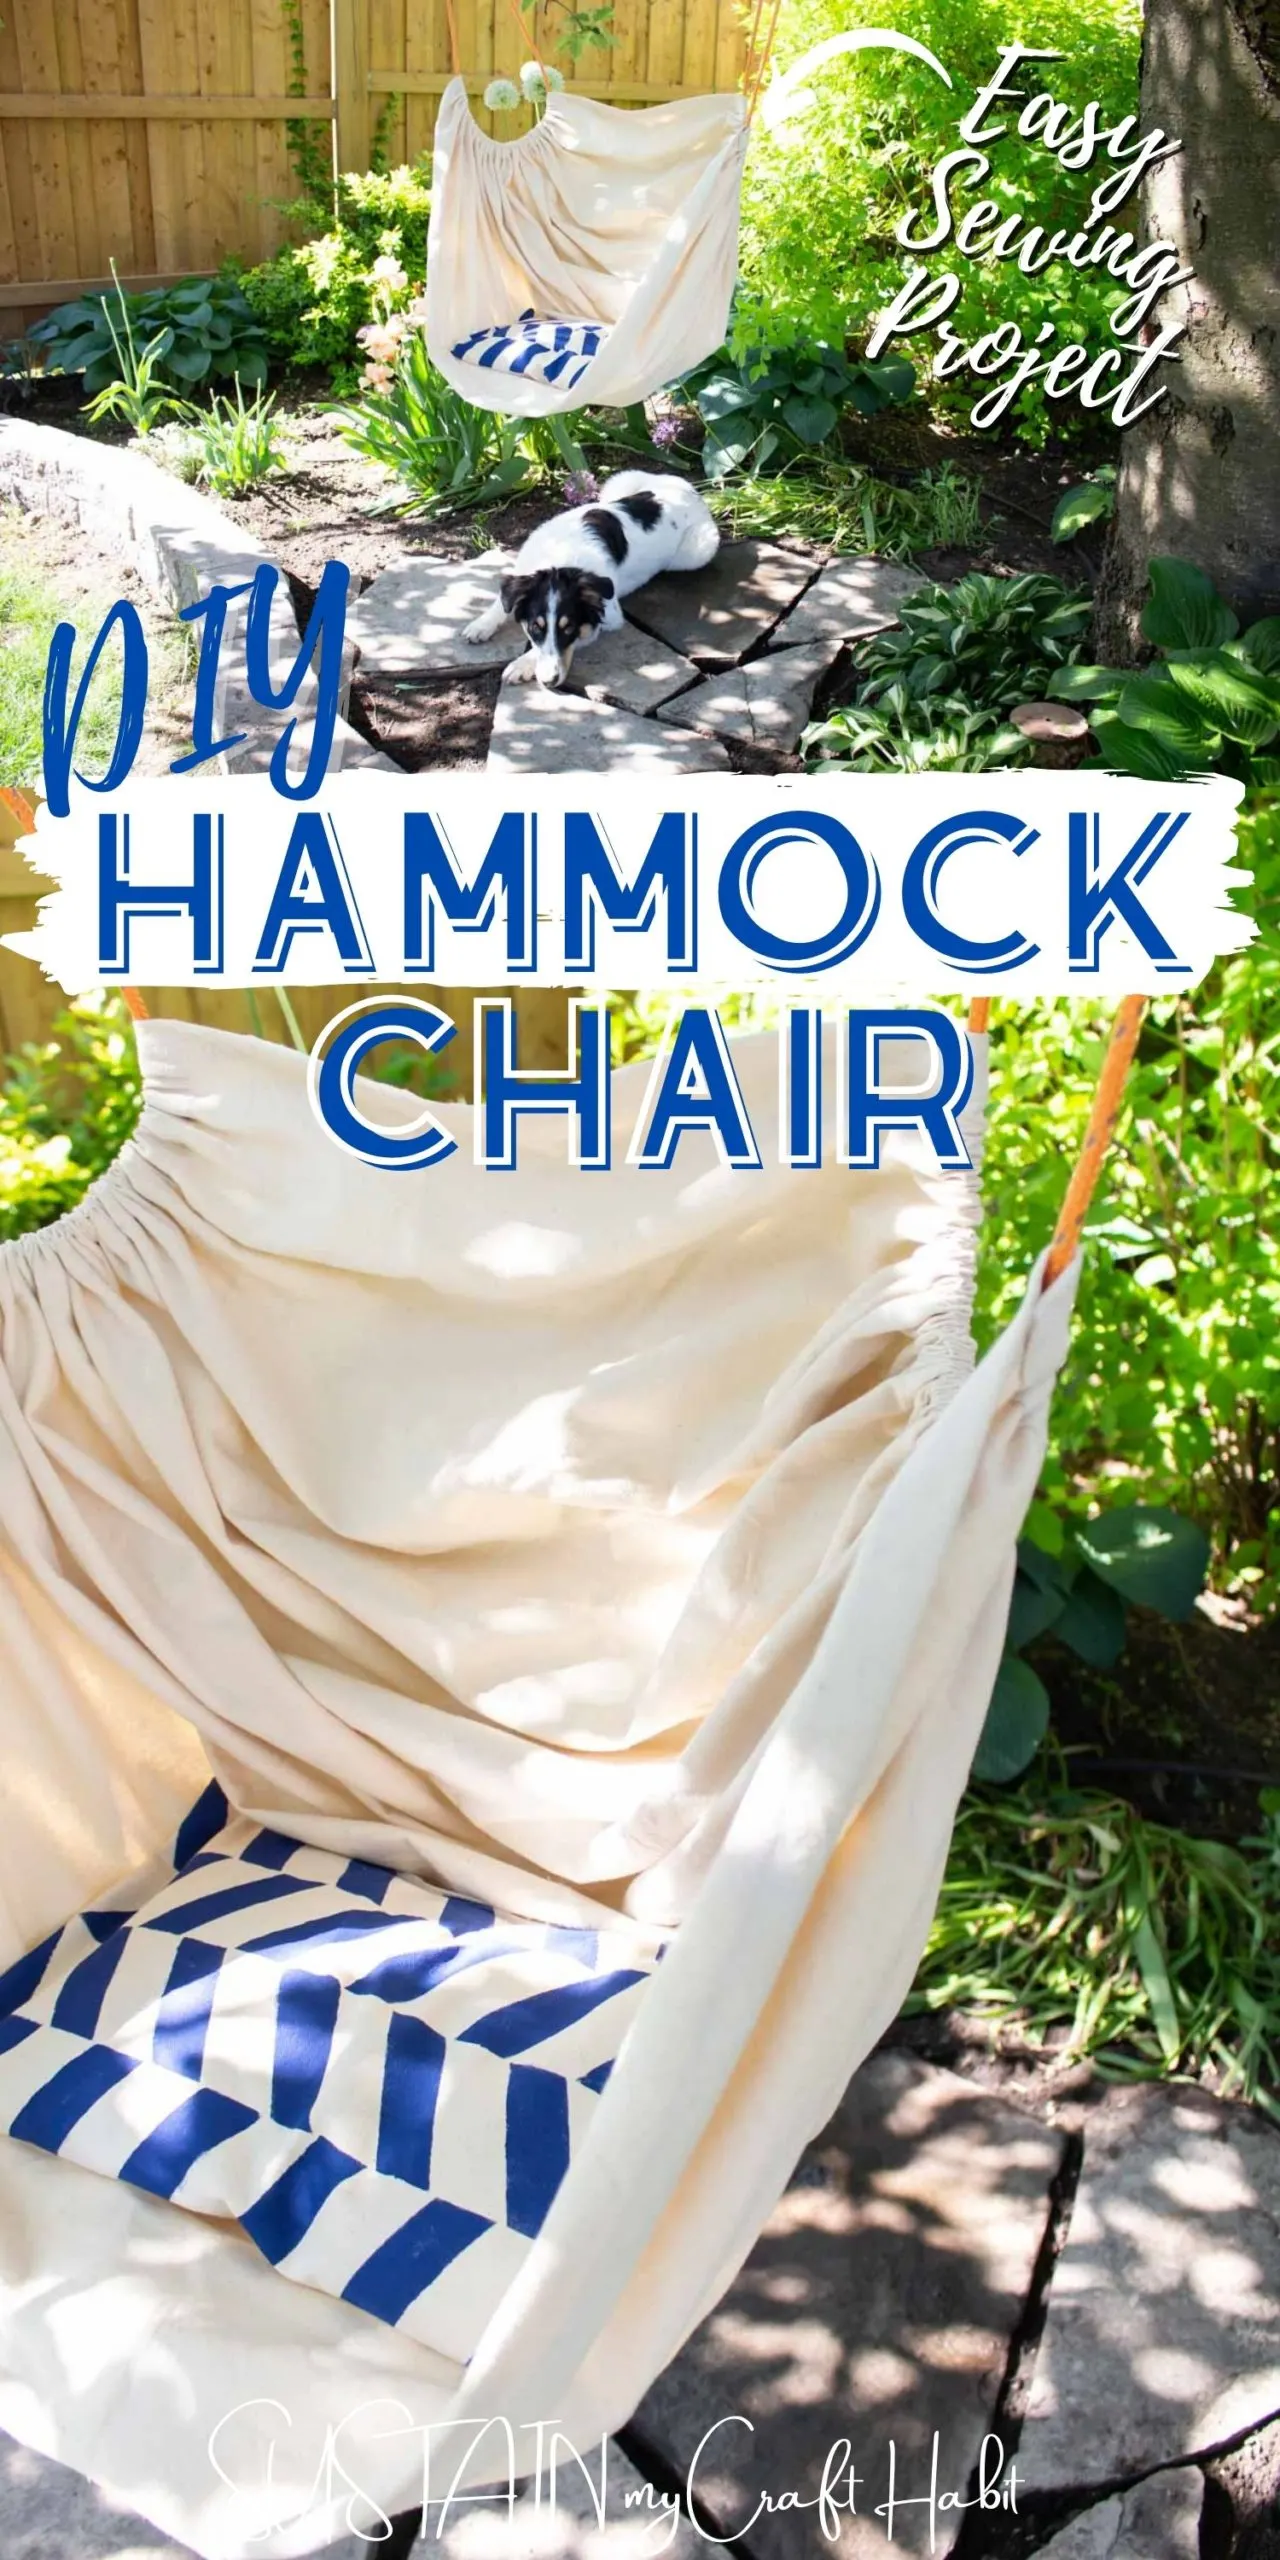 Collage of fabric hammock chair with text overlay.